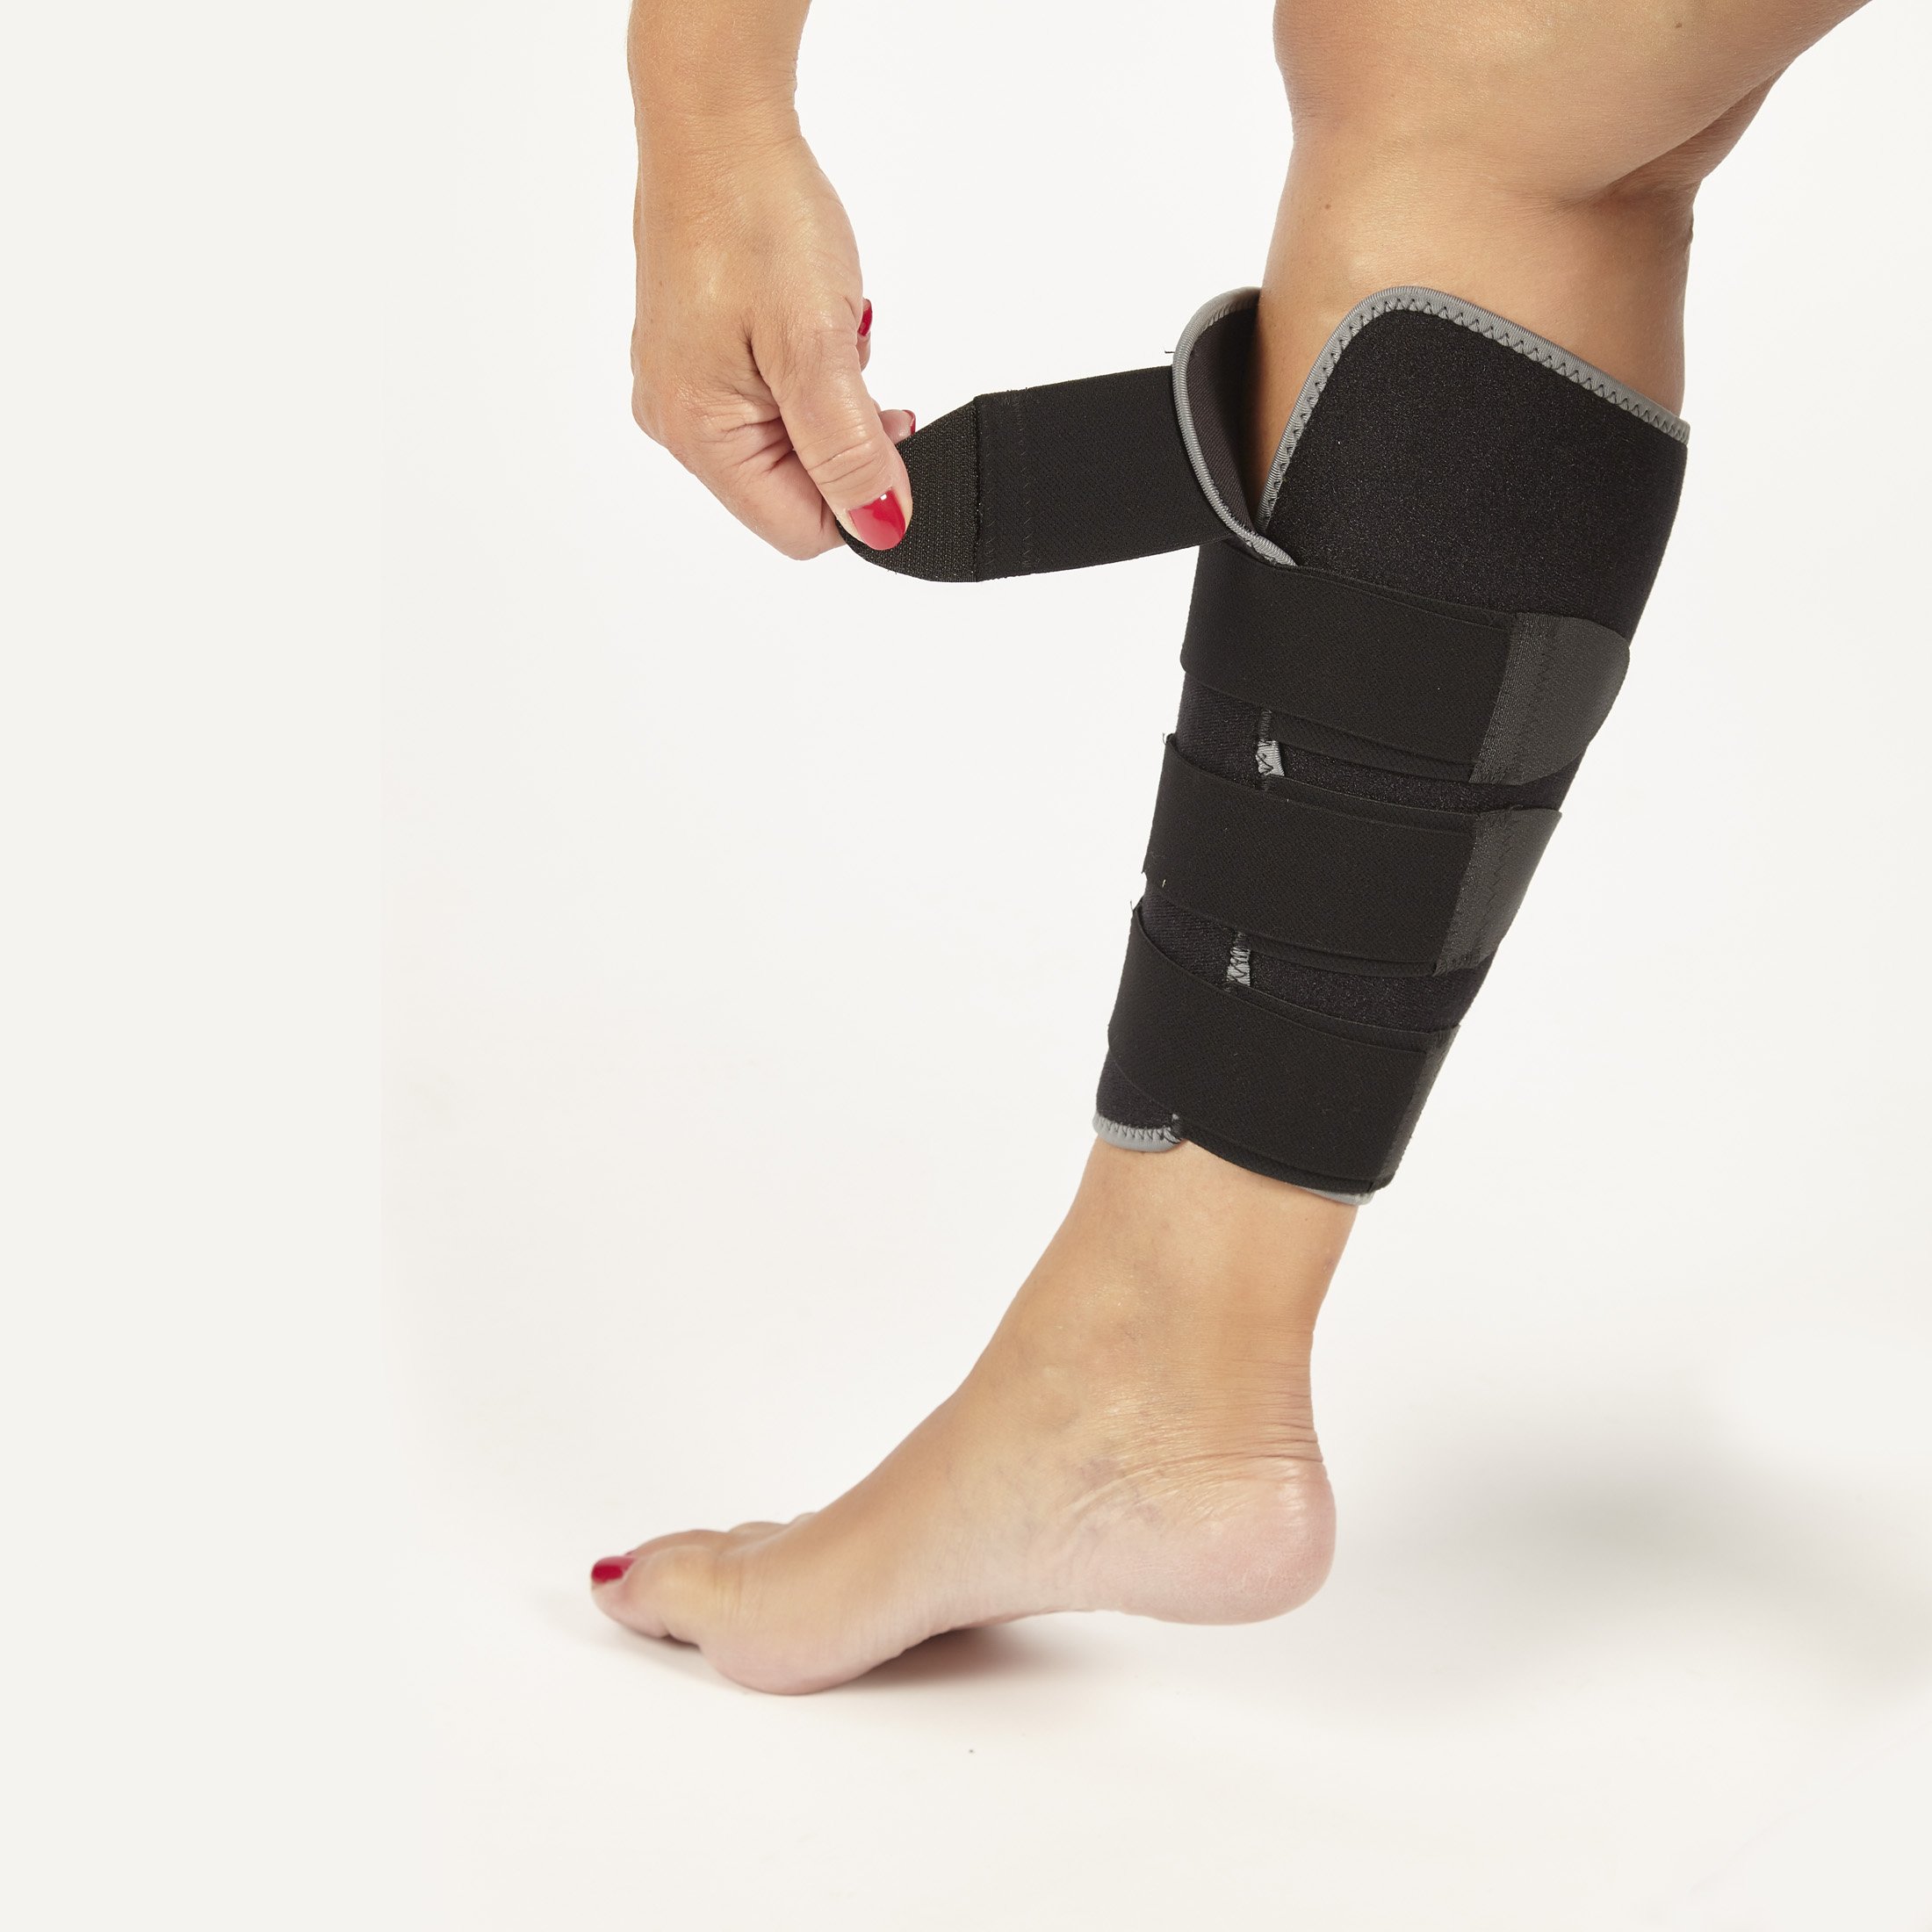 1 Pcs Calf Brace - Adjustable Shin Splint Support - Lower Leg Compression  Wrap Increases Circulation, Reduces Muscle Swelling - Calf Sleeve  Compatible